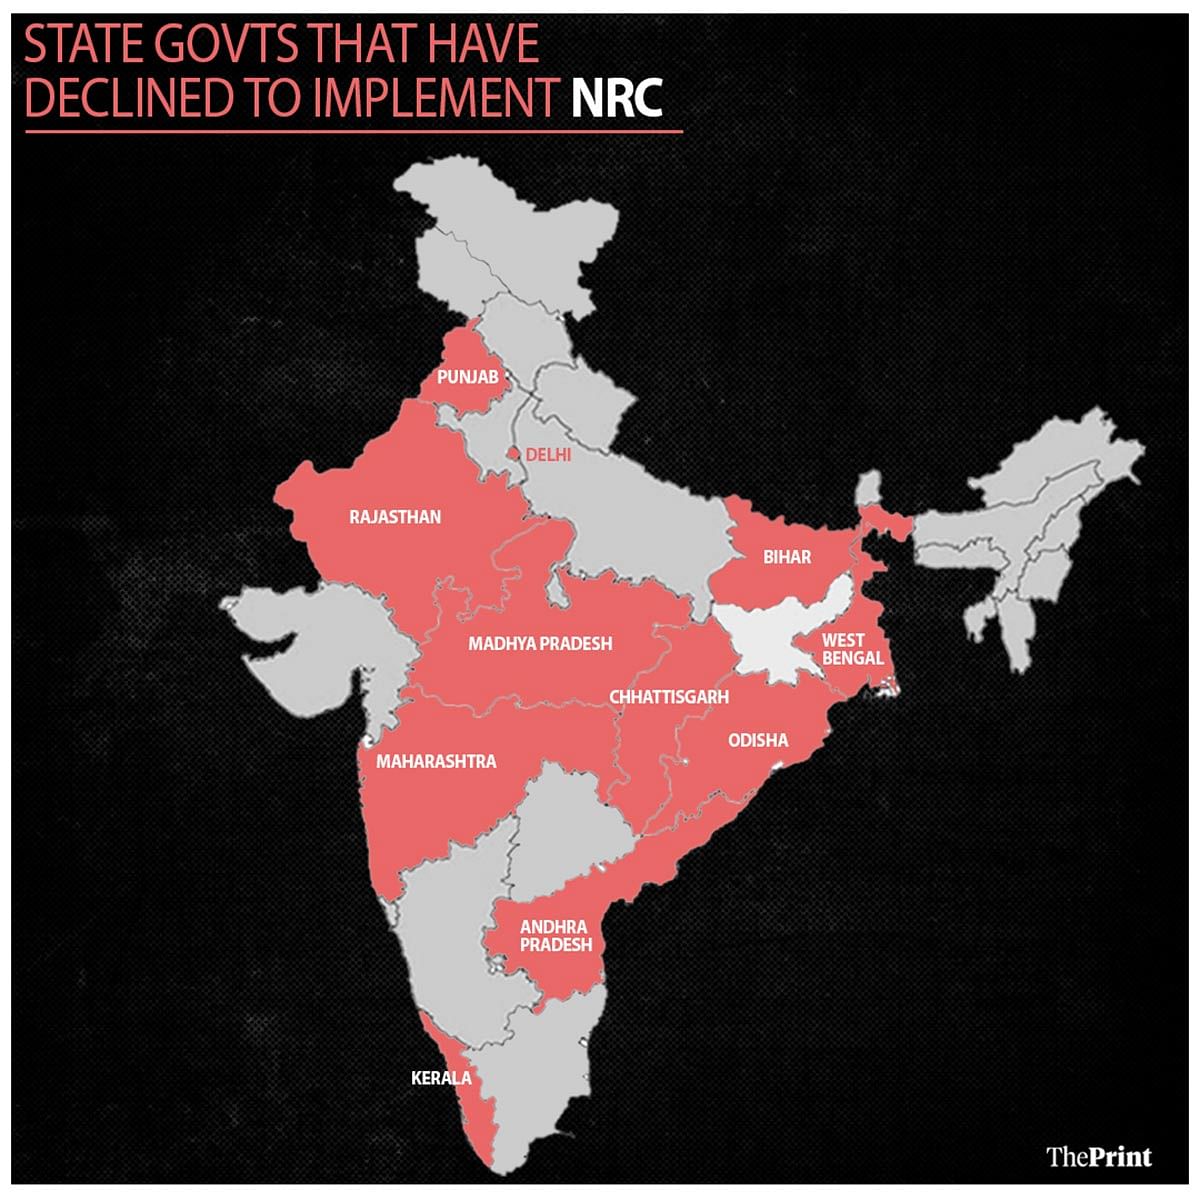 State govts that have declined to implement NRC | Infographic: ThePrint